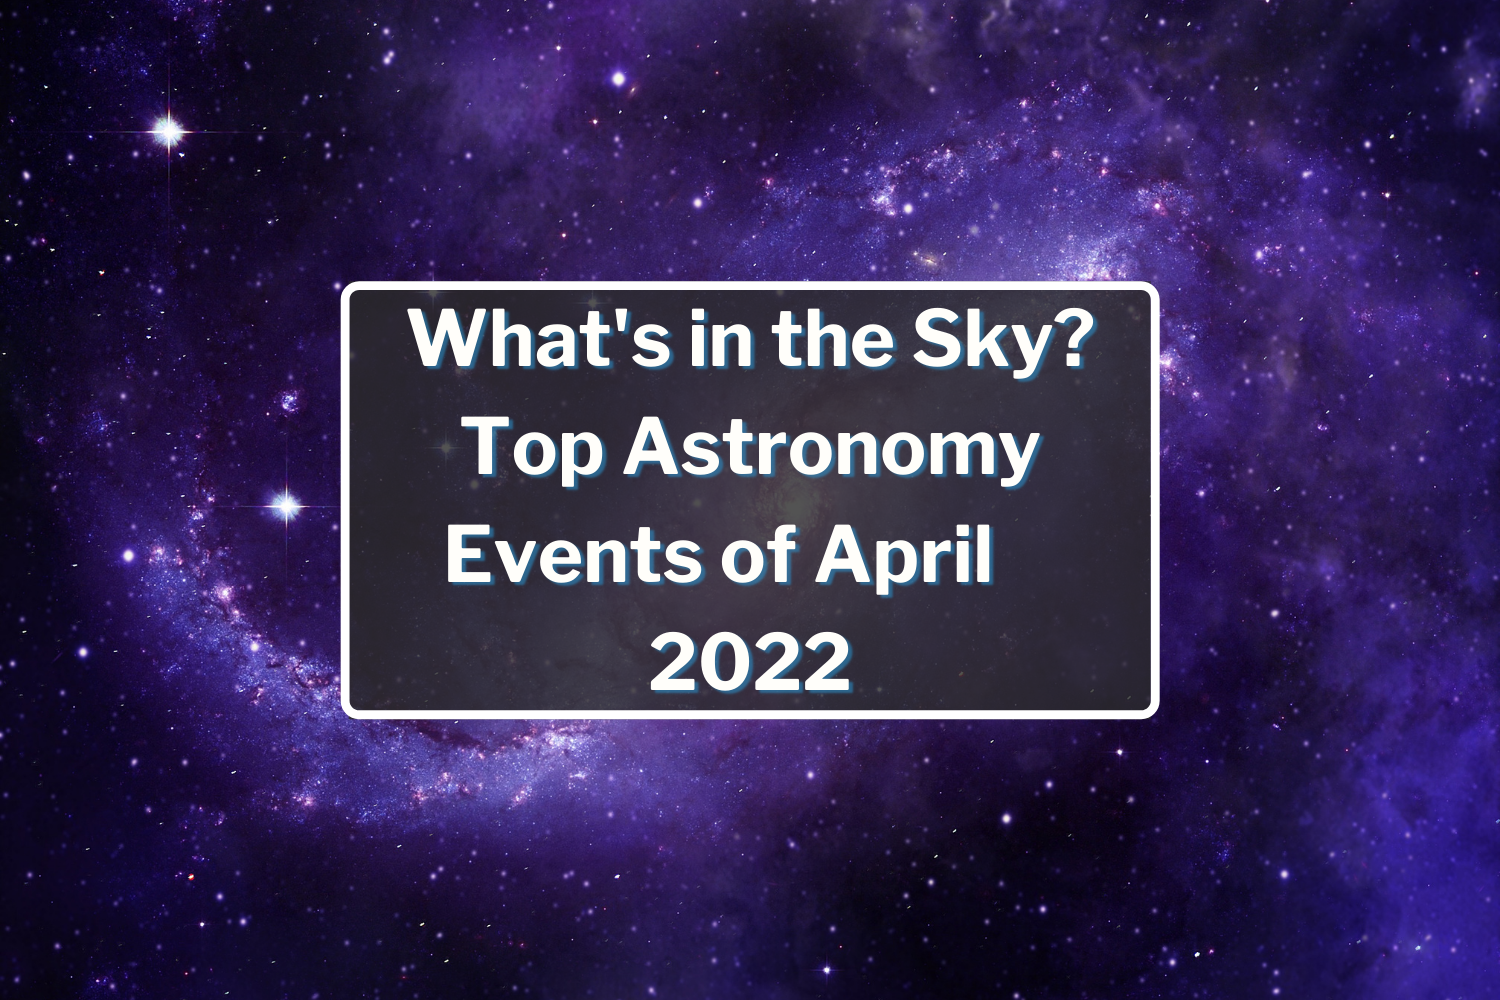 What's in the Sky? Top Astronomy Events of April 2022